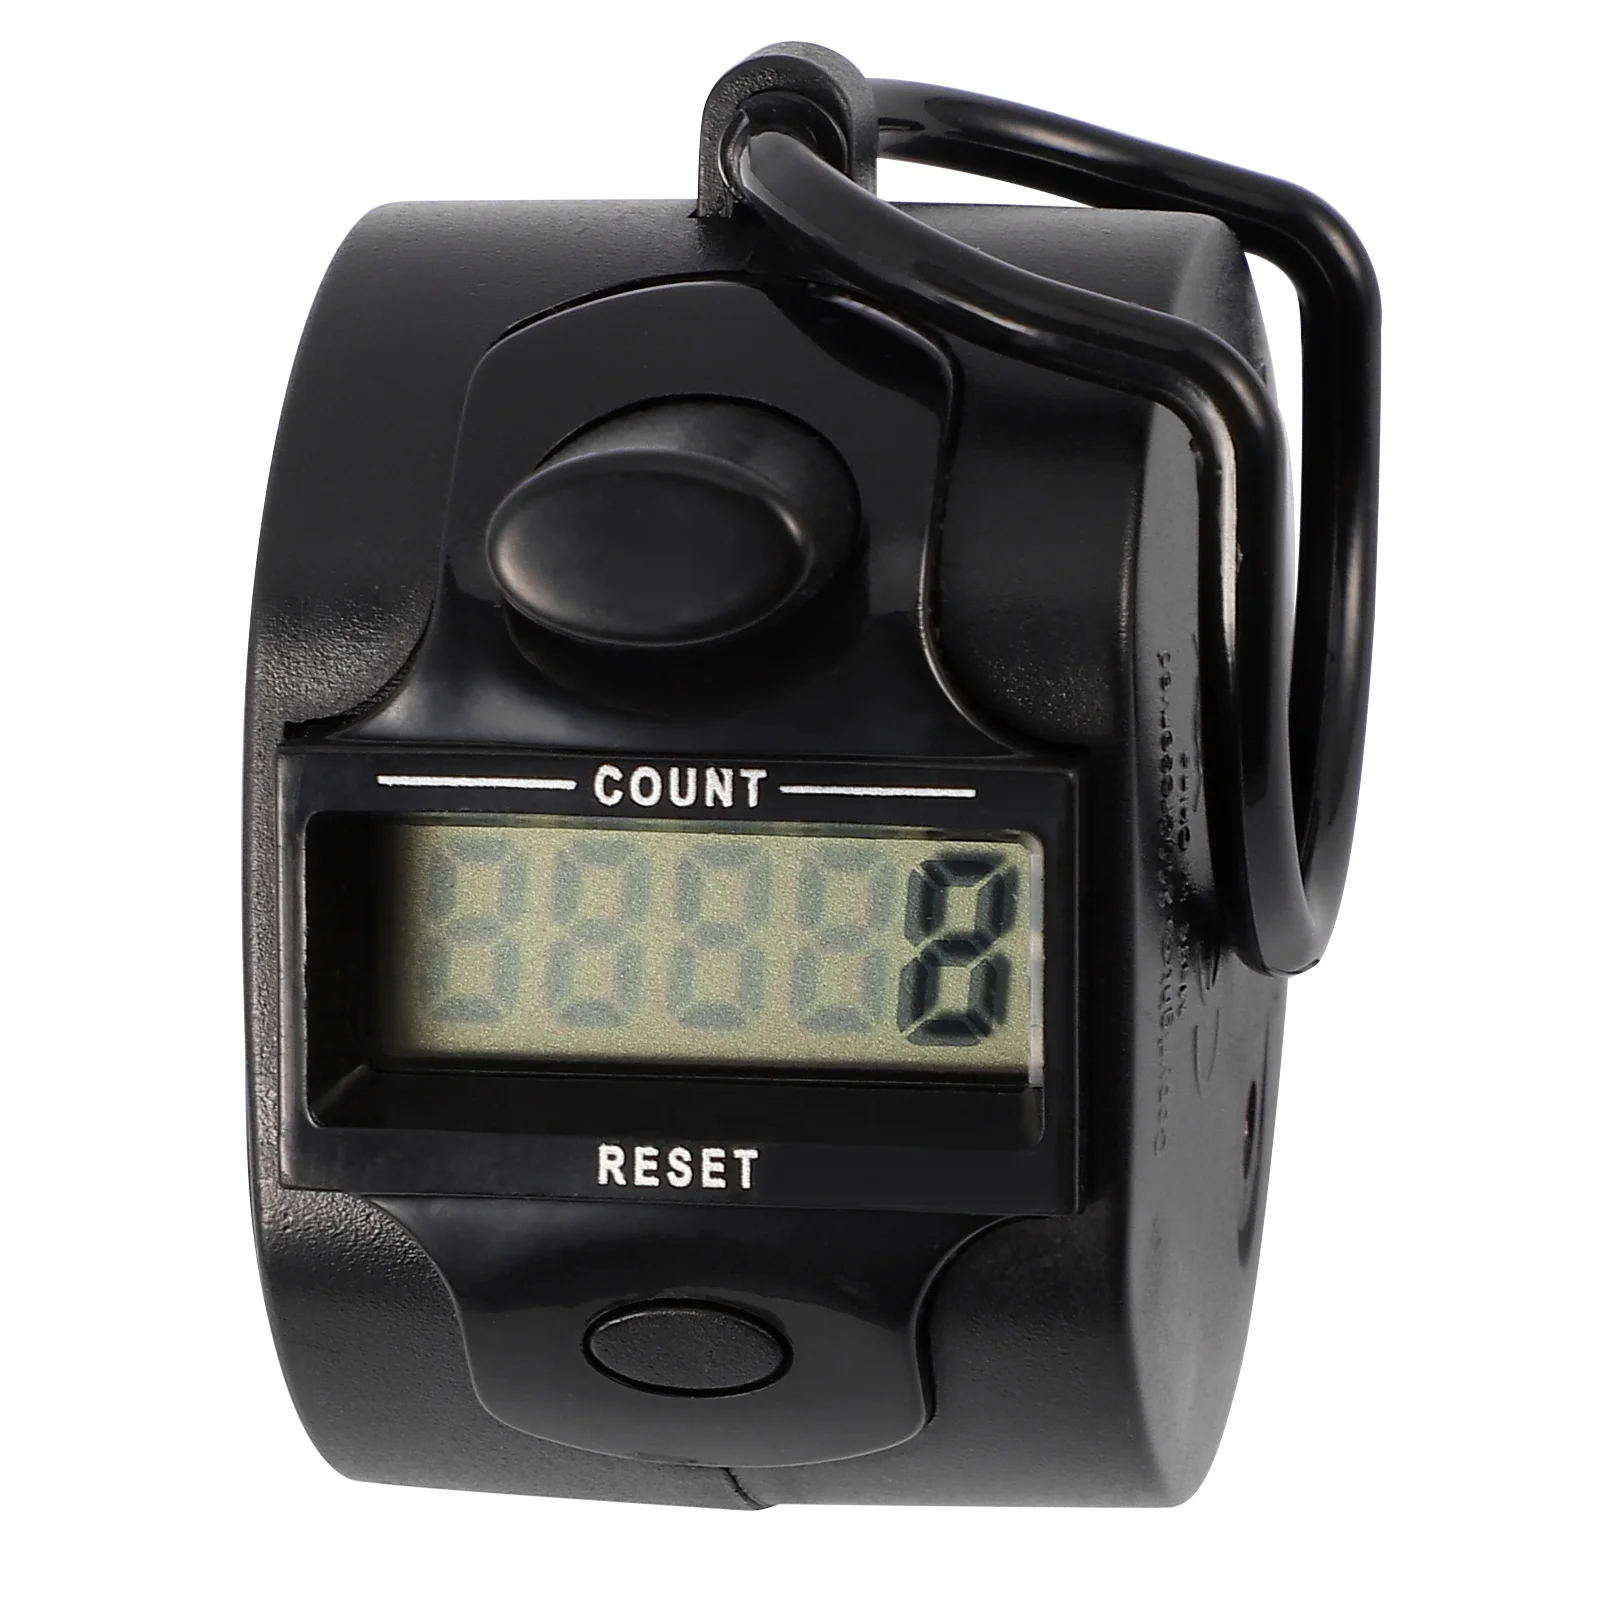 Manual Electronic Counter Hand Held Push Precision Pedometer 5-Digit Number Clicker Counter Tool Sports Gadget Sports Supplies